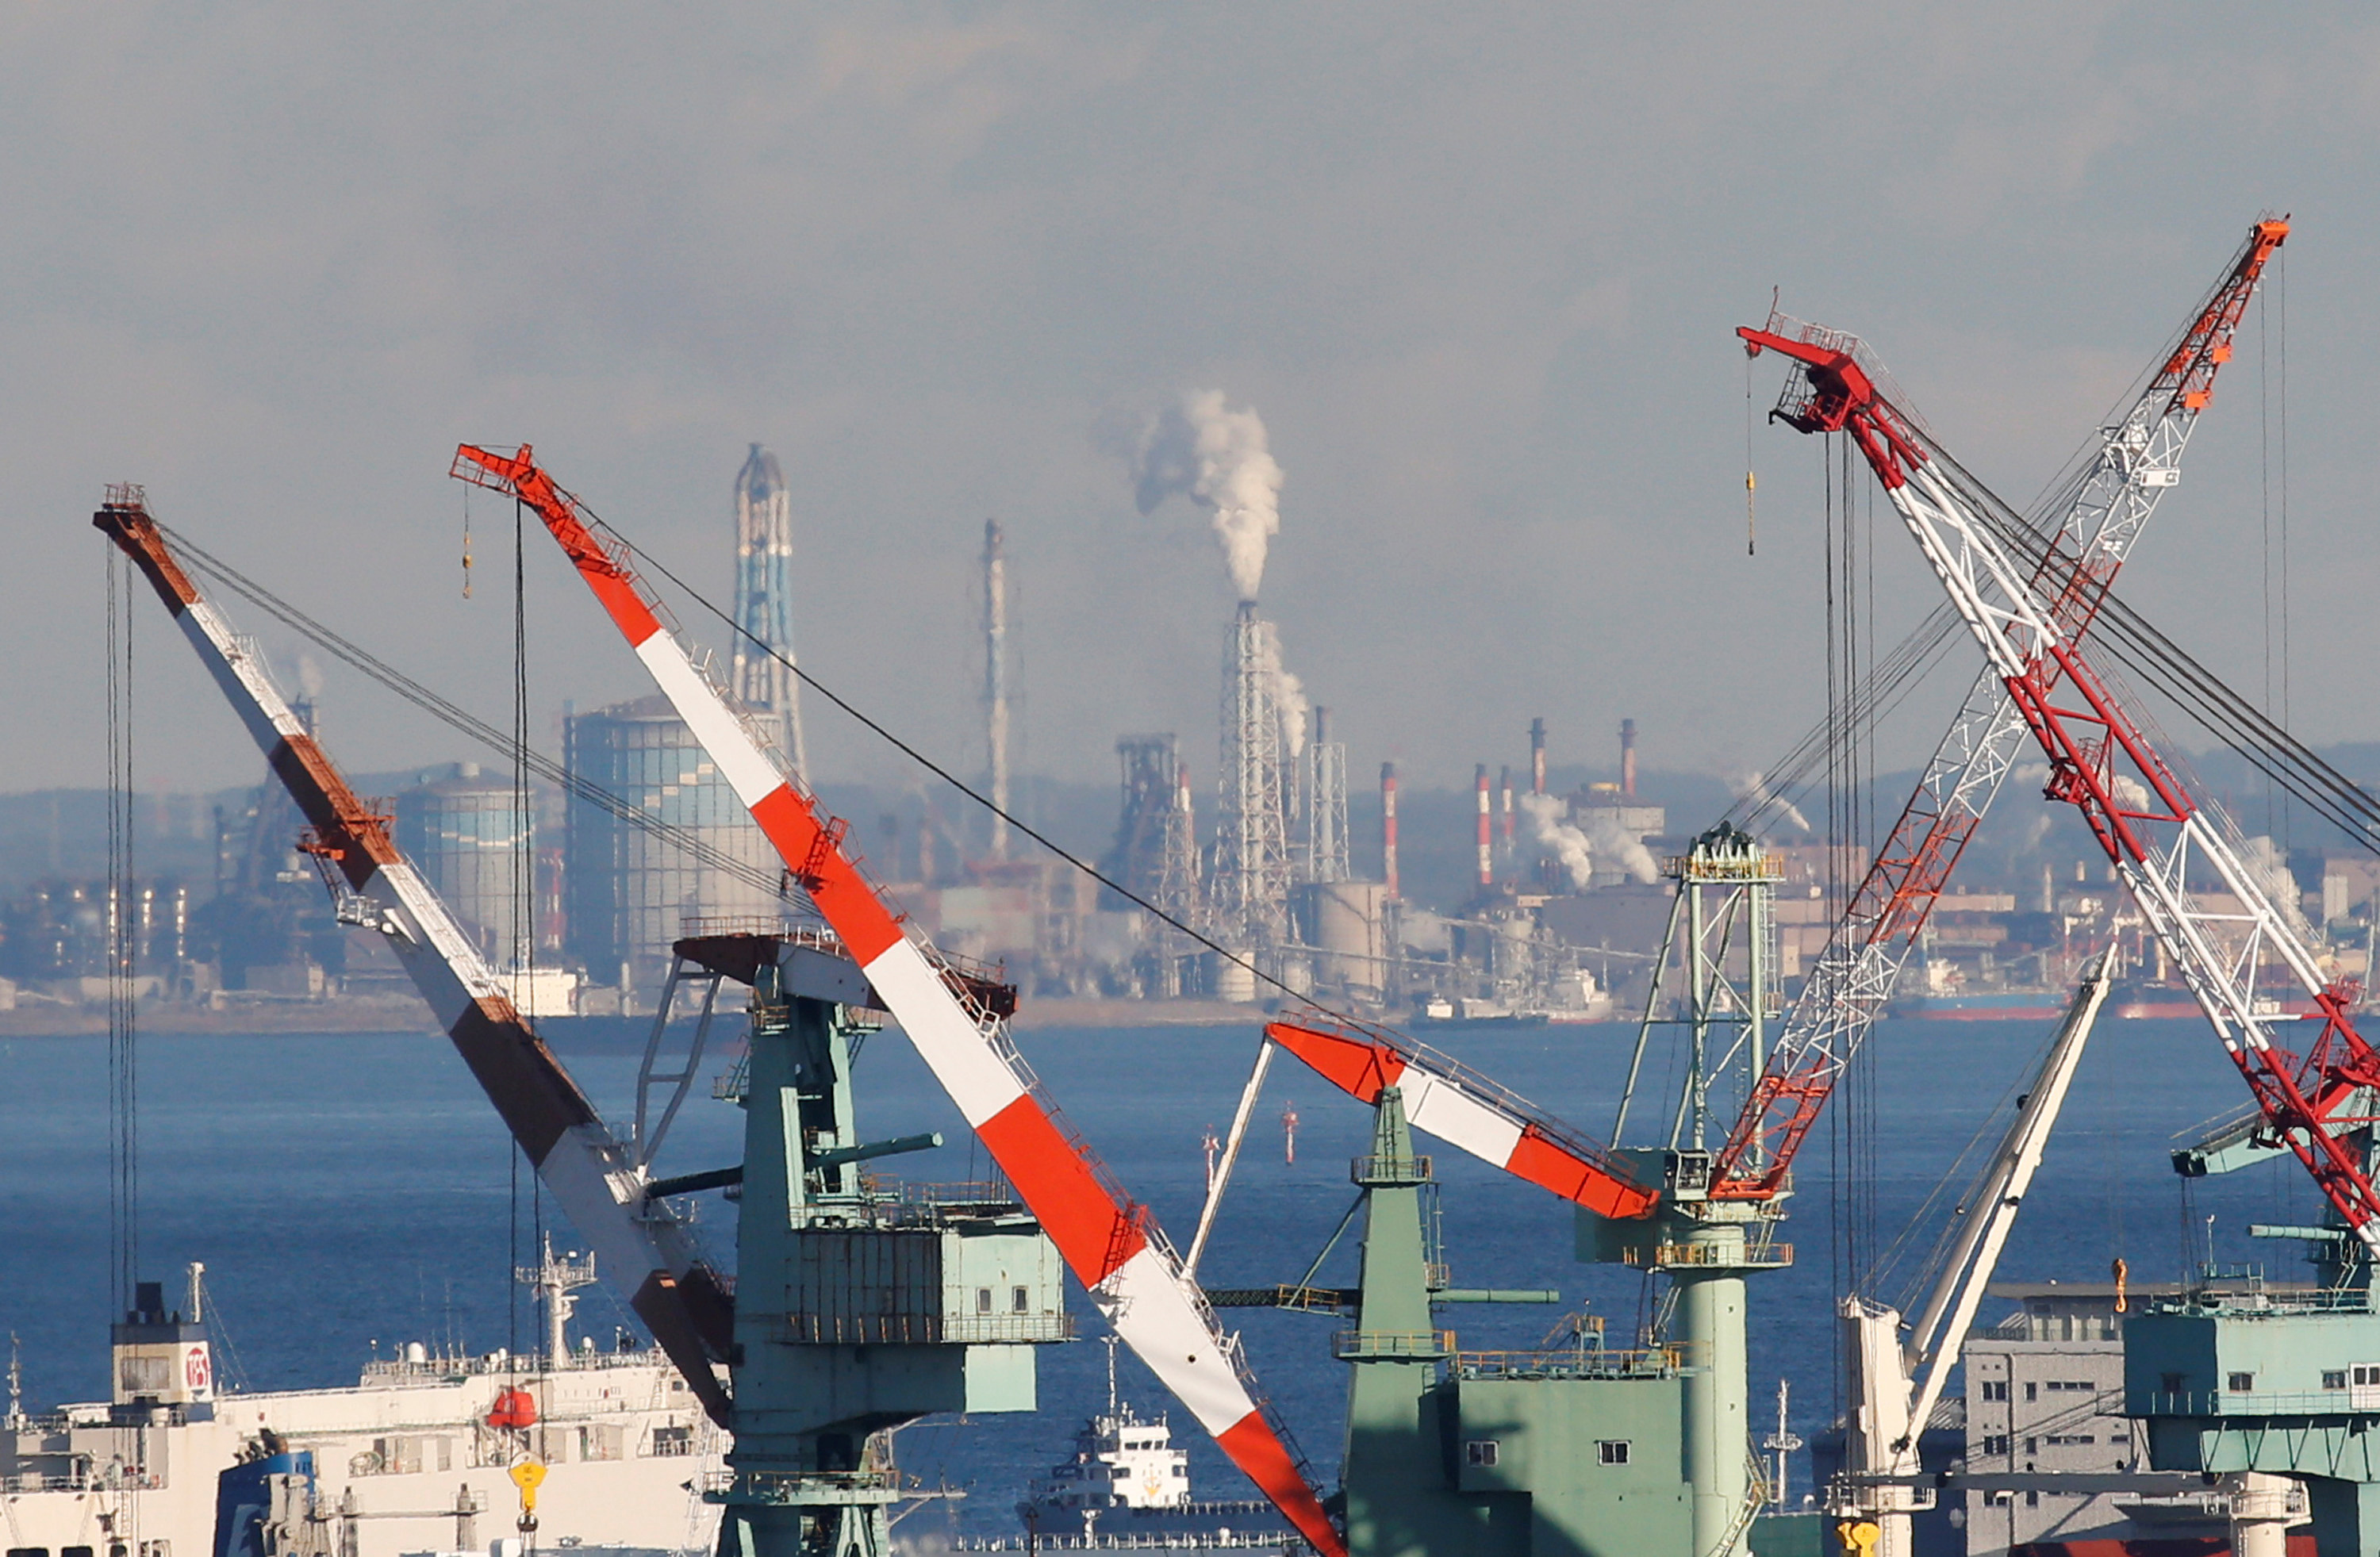 Chimneys and cranes are seen at an industrial area in Yokohama